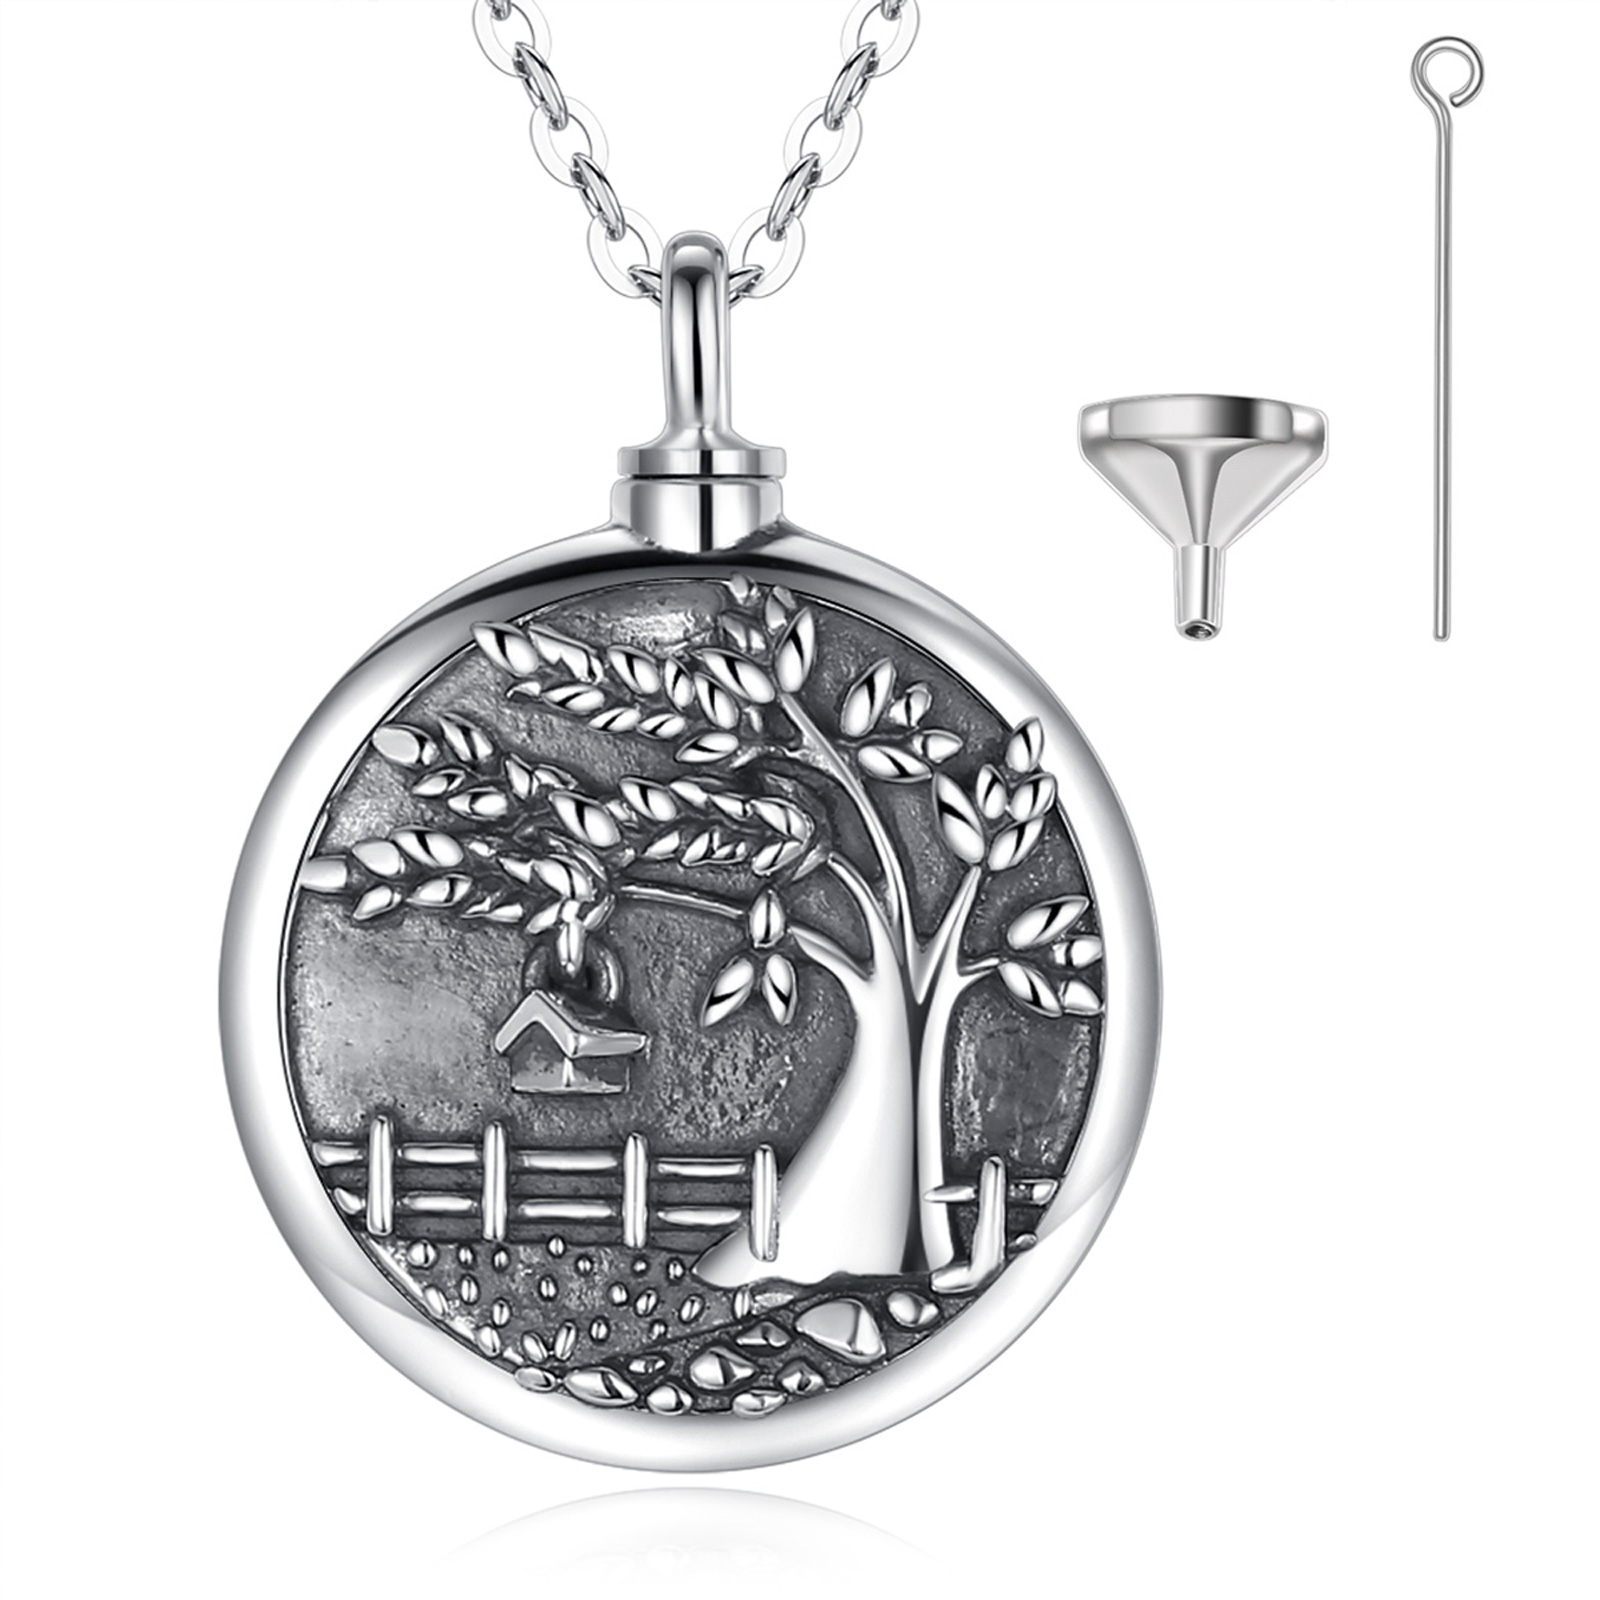 Merryshine Cremation Jewelry Family Tree Pattern 925 Sterling Silver Jewelry Pet Cremation Ashes Urn Necklace